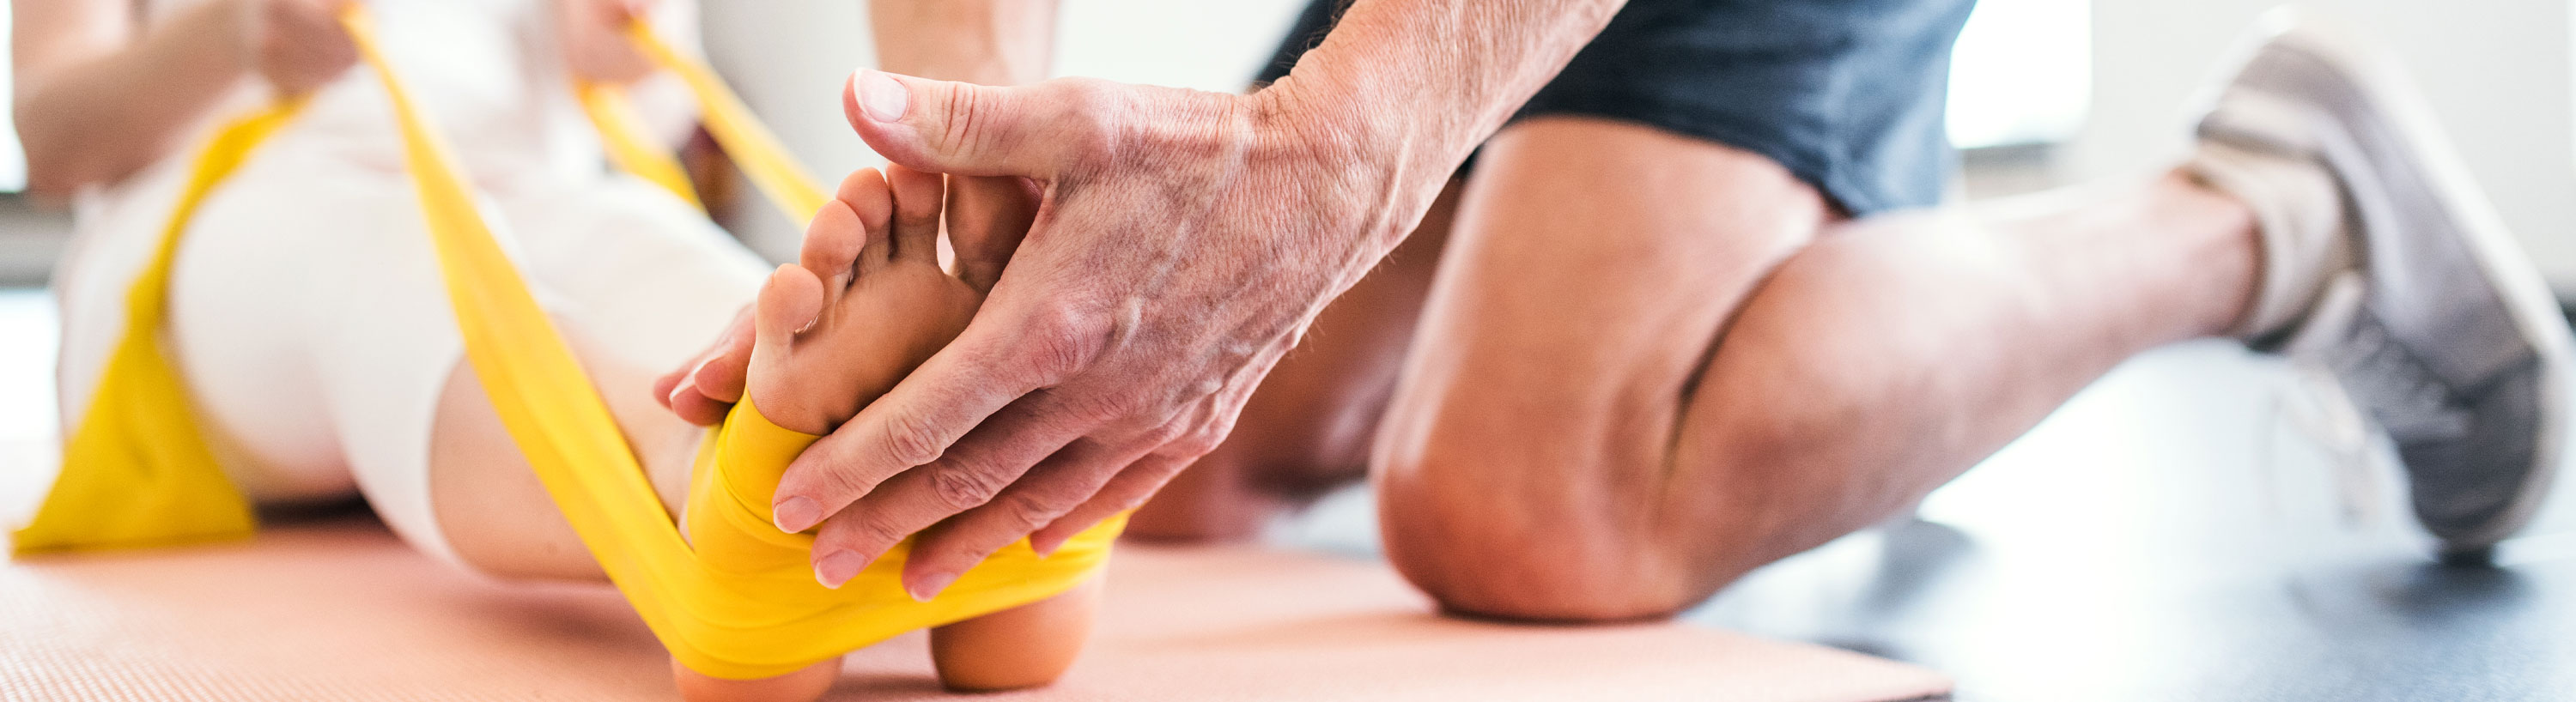 Banner picture of a Physical Therapist holding a woman's feet together as she is pulling on stretchy material with her hands up towards her as it's wrapped around her feet.